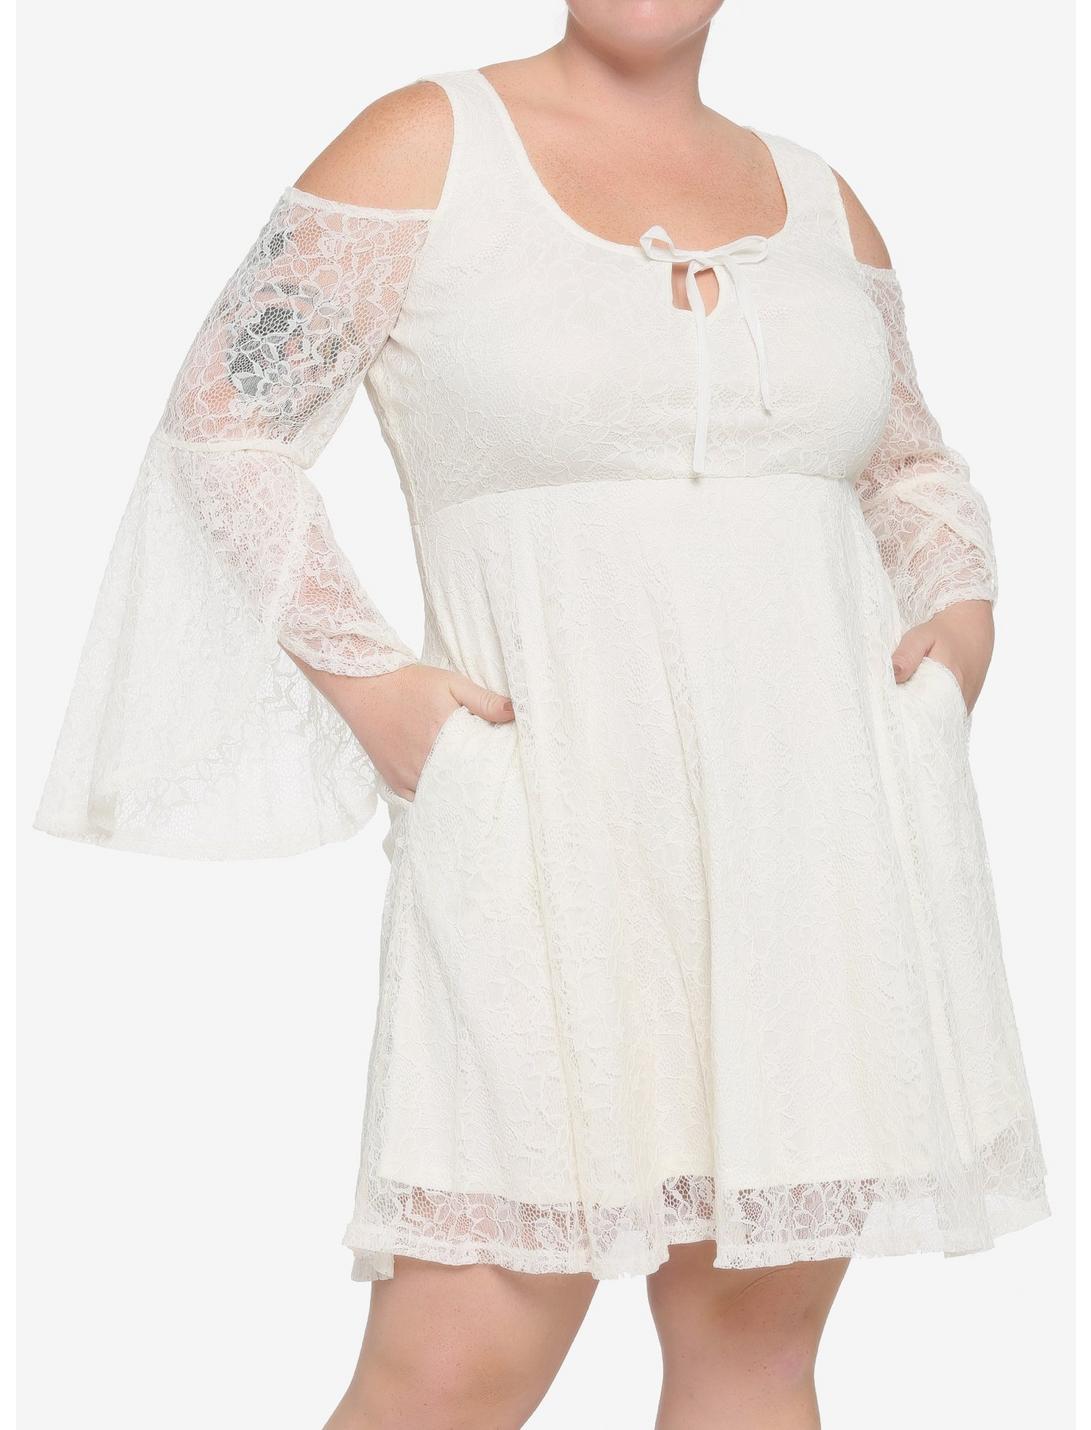 Ivory Cold Shoulder Bell Sleeve Lace Dress Plus Size | Hot Topic